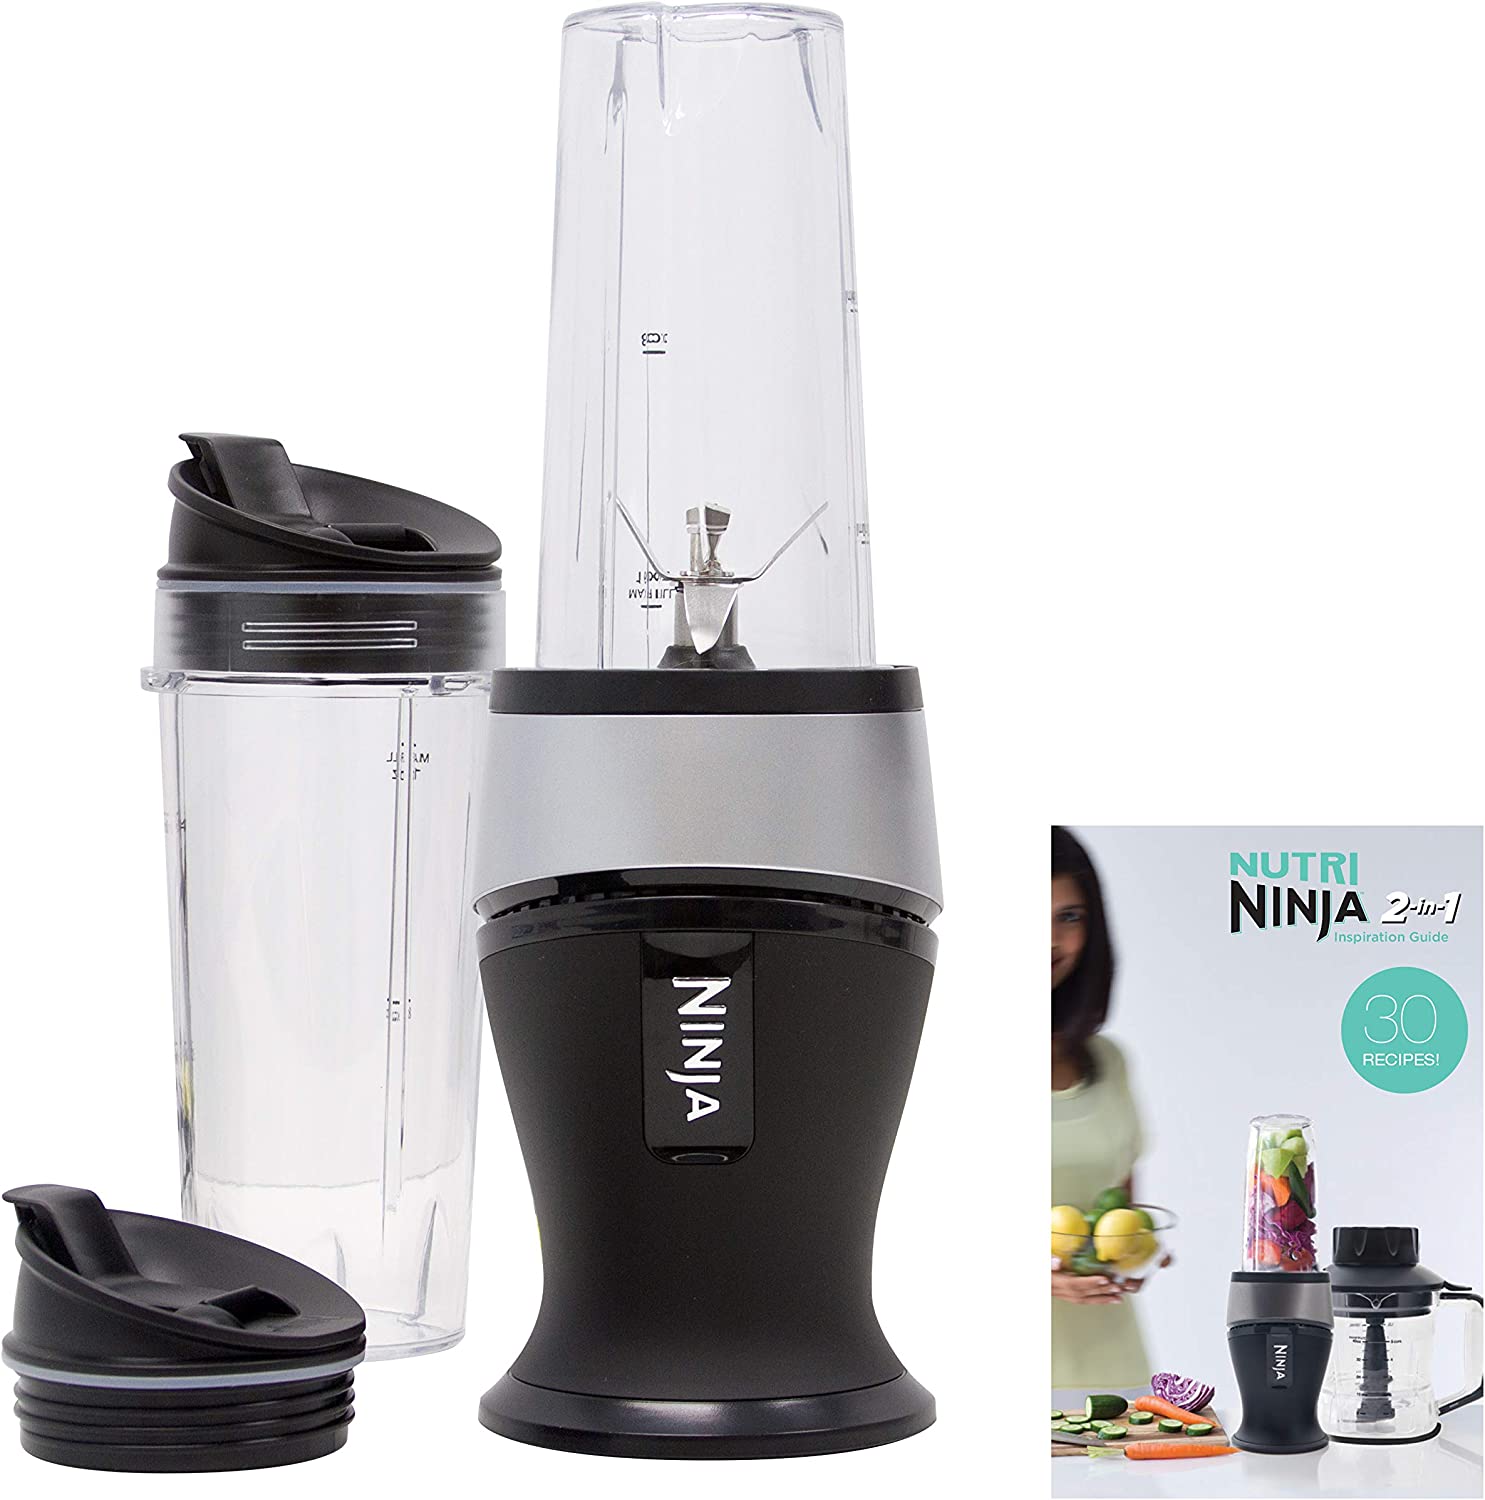  9. Ninja Personal Blender with 16-Ounce Cups and Spout lids 